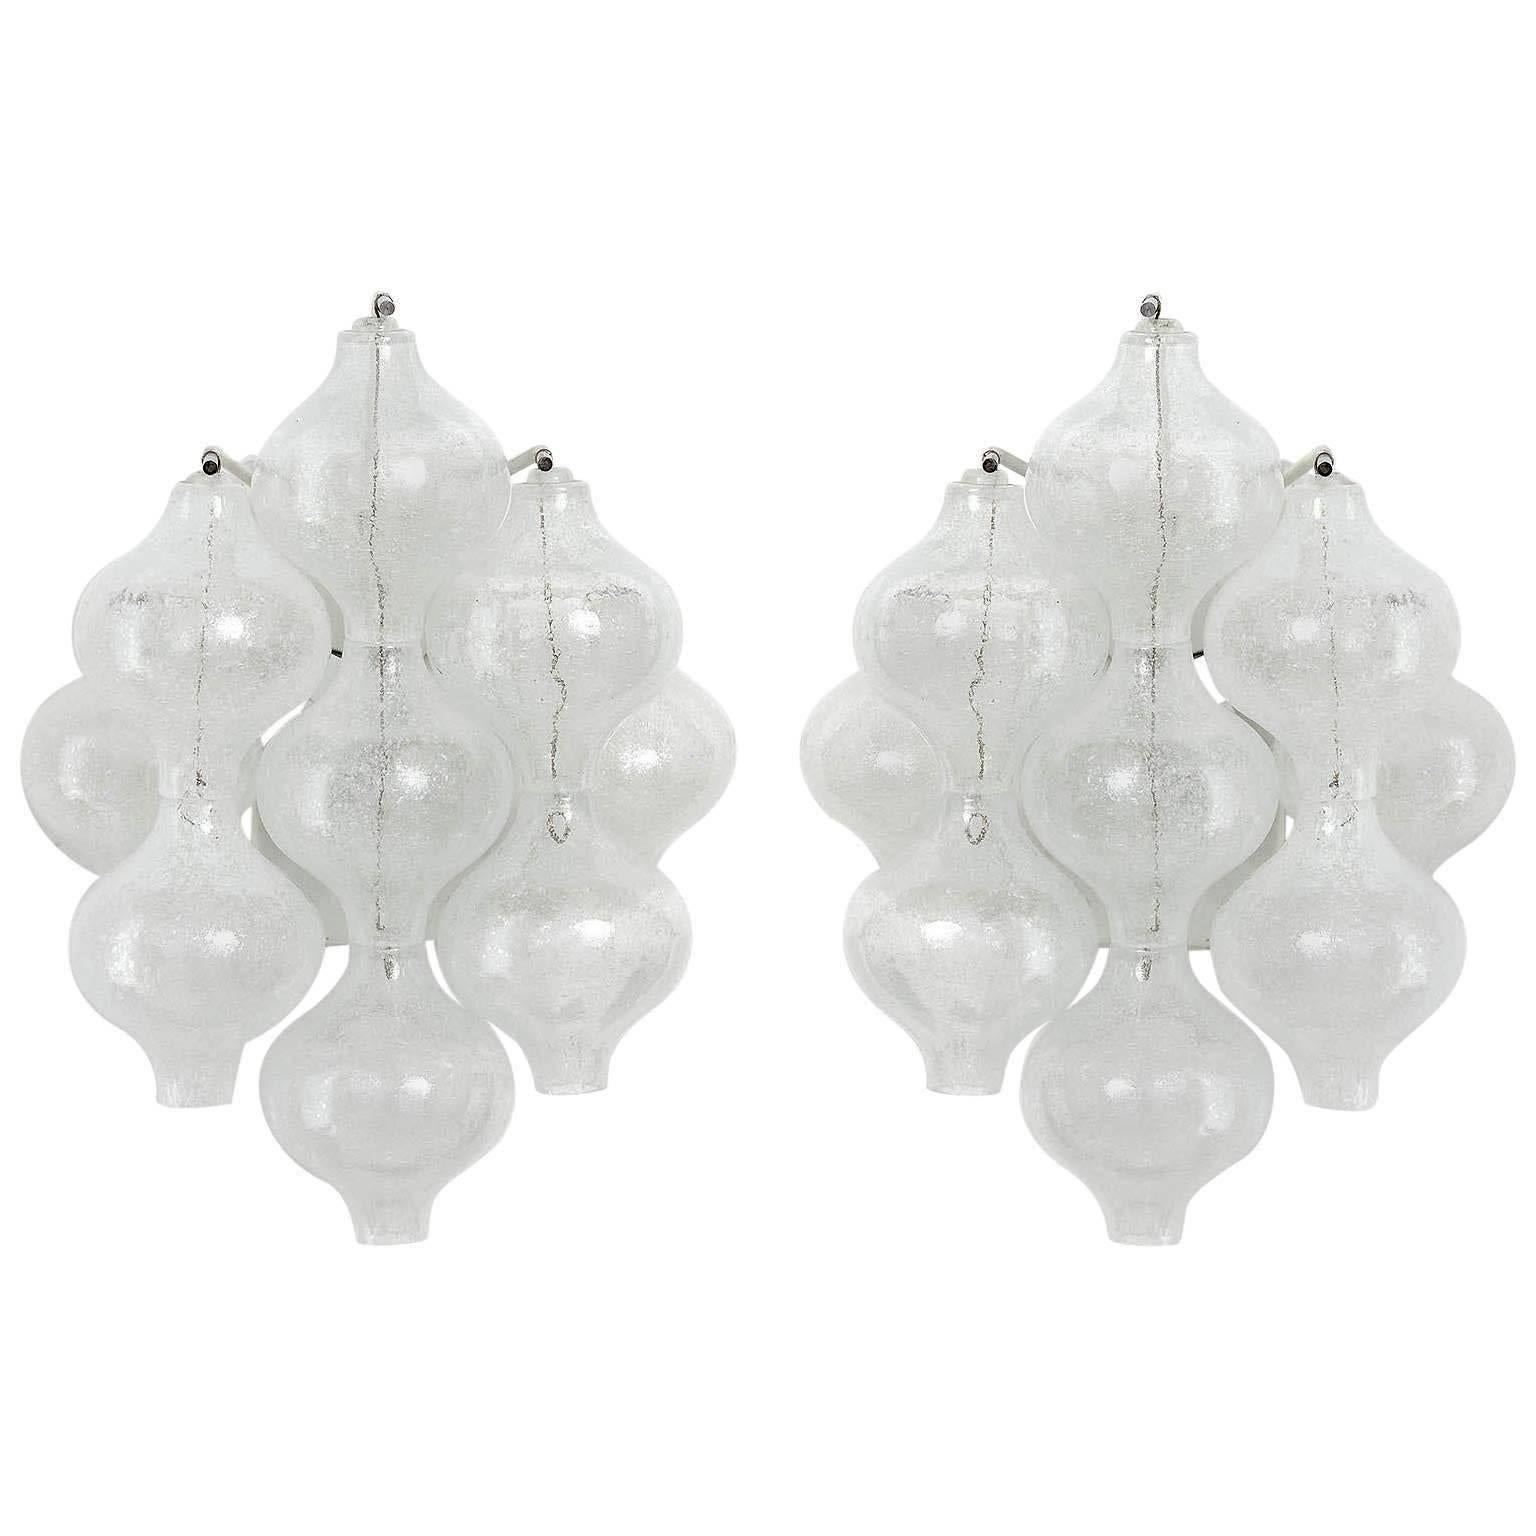 One of three 'Tulipan' glass wall light fixtures by J.T. Kalmar, Austria, Vienna, manufactured in midcentury, circa 1970 (late 1960s or early 1970s).
The name Tulipan derives from the tulip shaped hand blown bubble glasses. Each glass is handmade